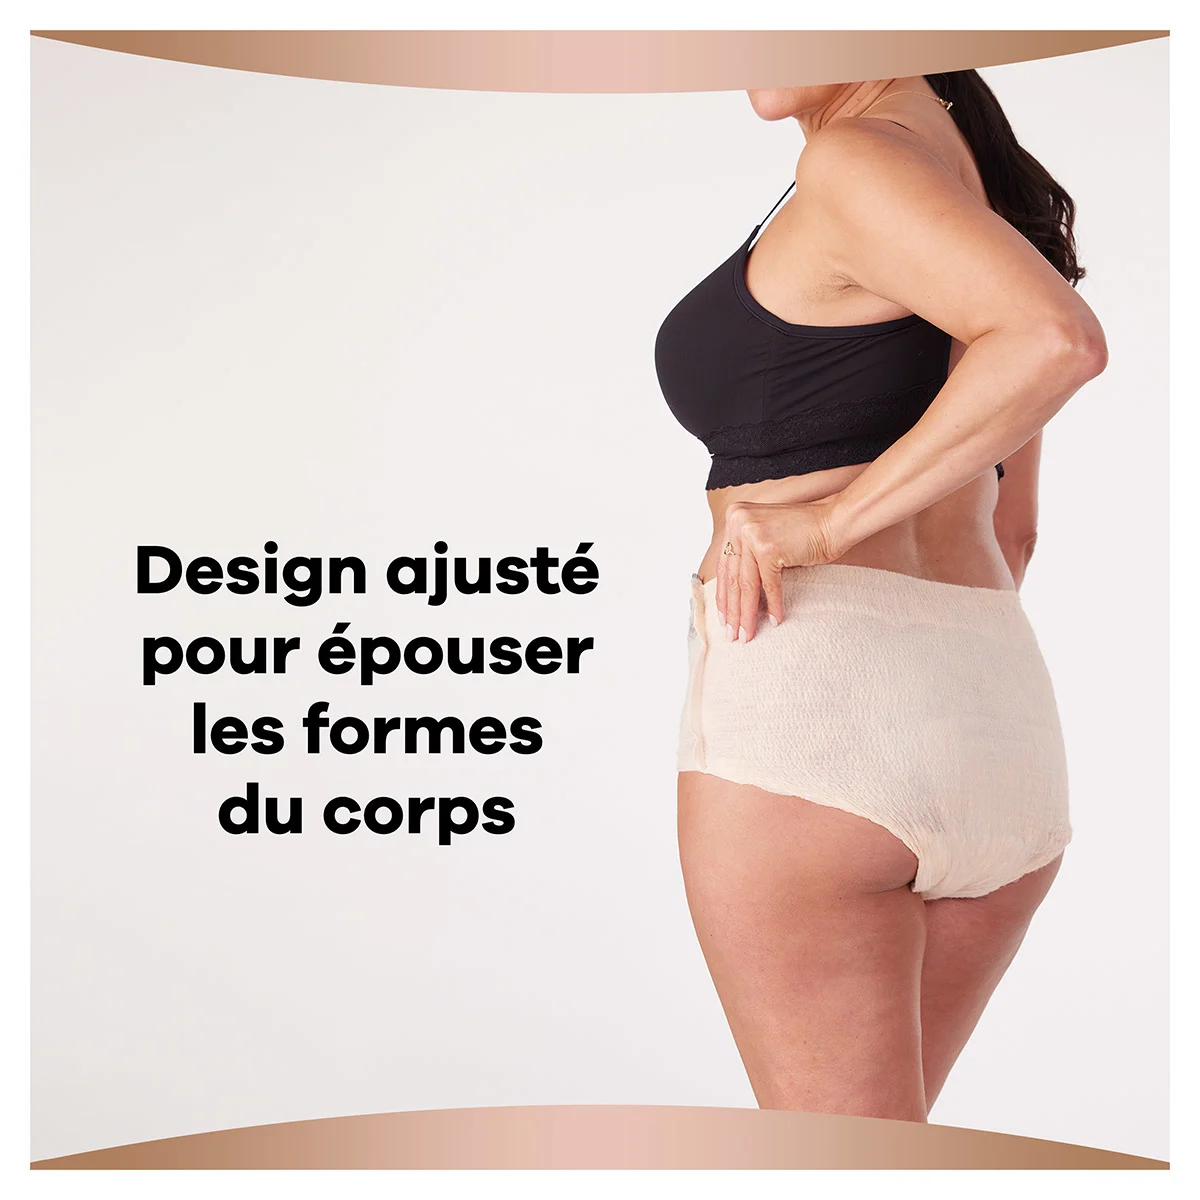 Paquet neuf sous vts jetables femme taille M, Always discreet